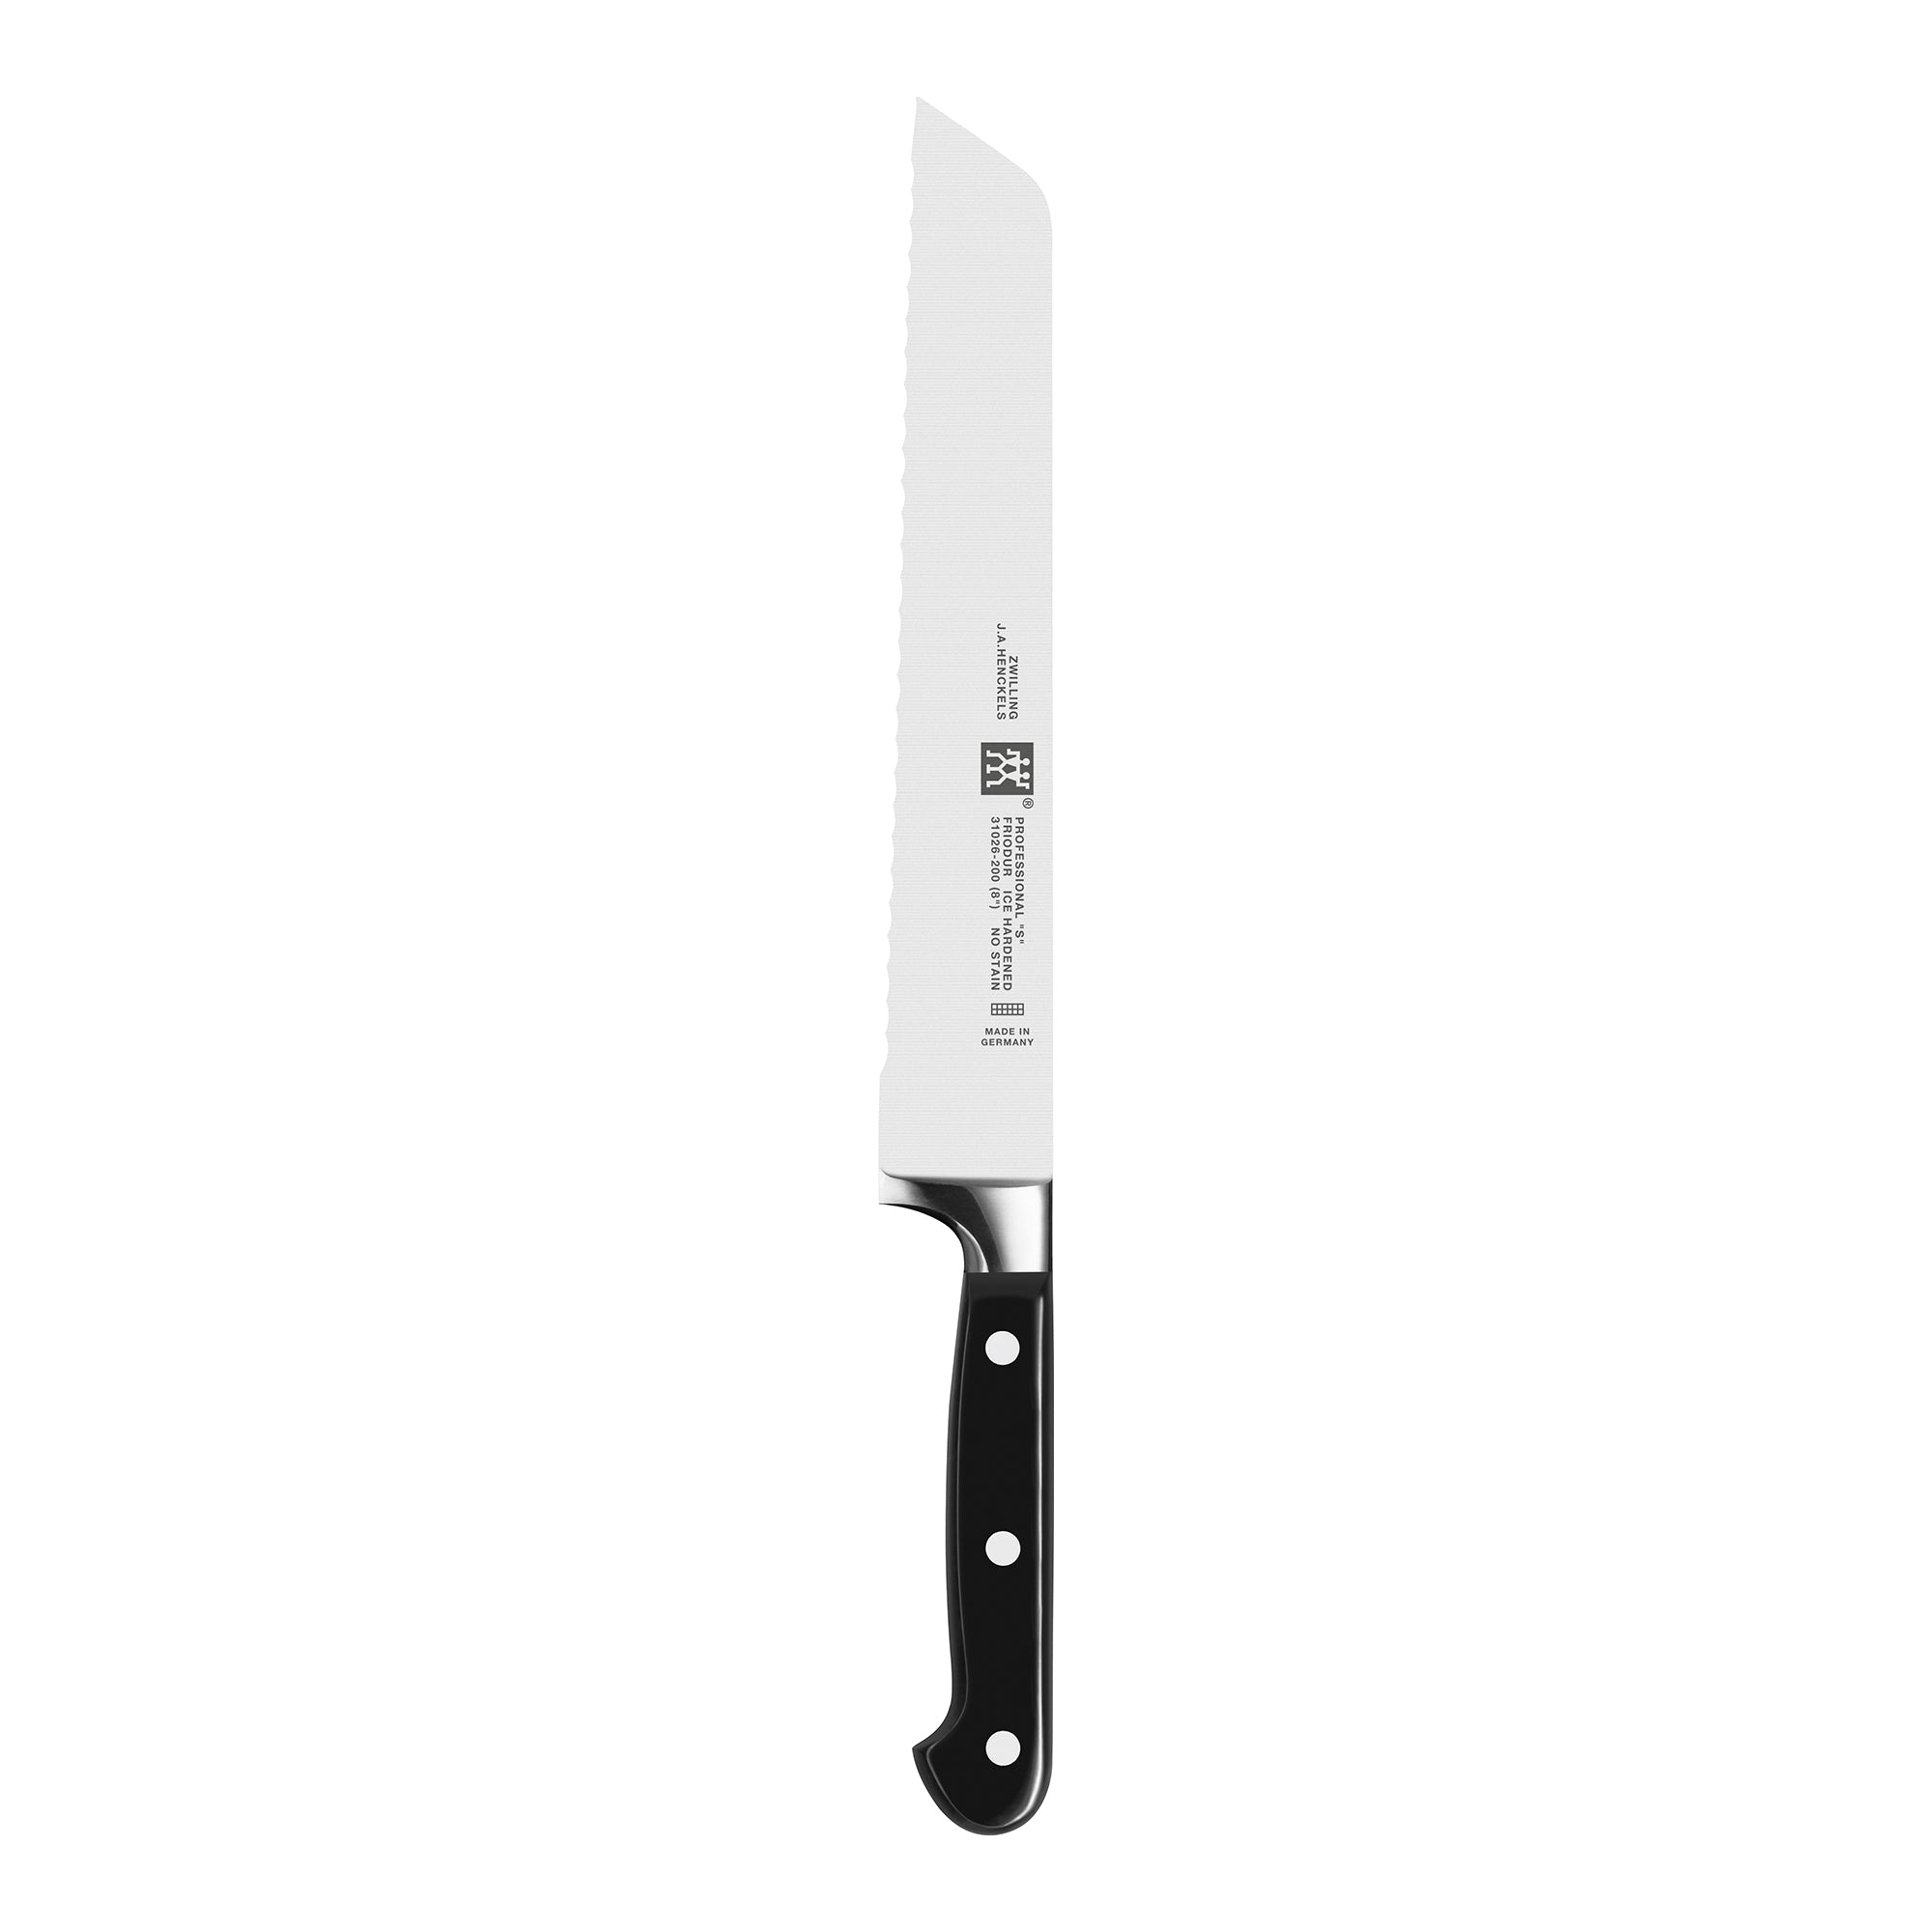 Zwilling Professional "S" 8" Bread Knife